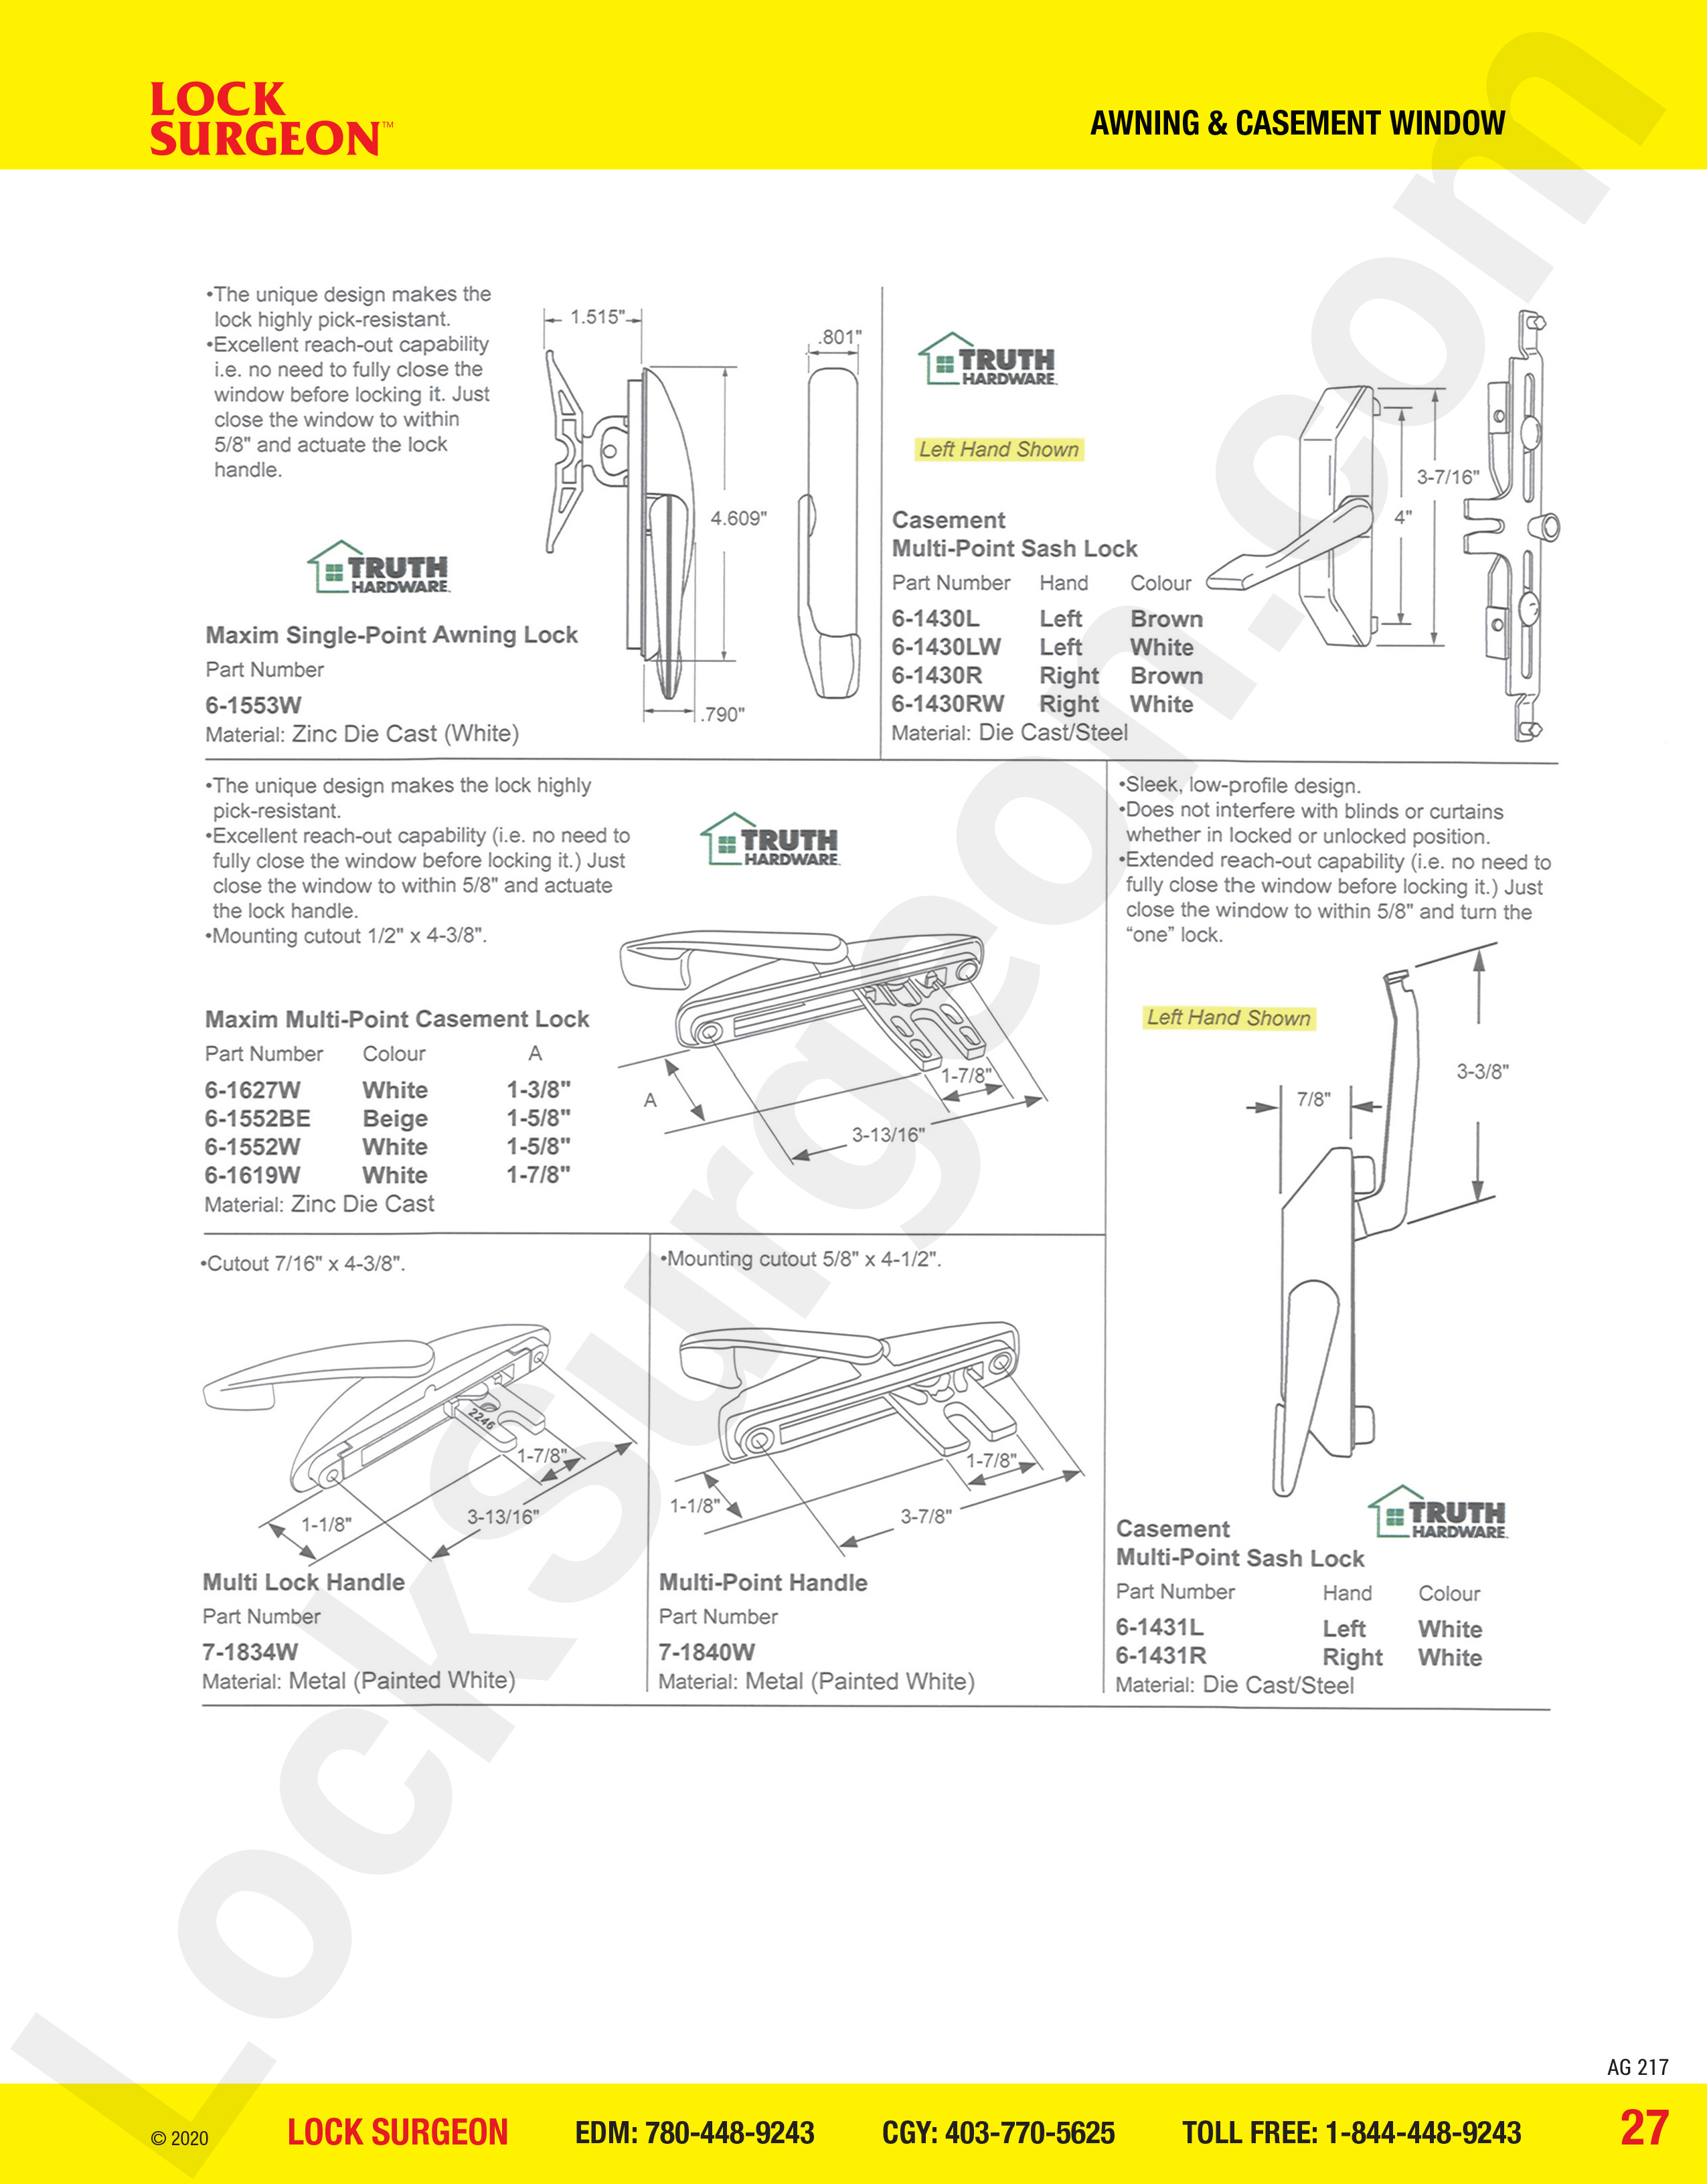 awning and casement window parts for locks.